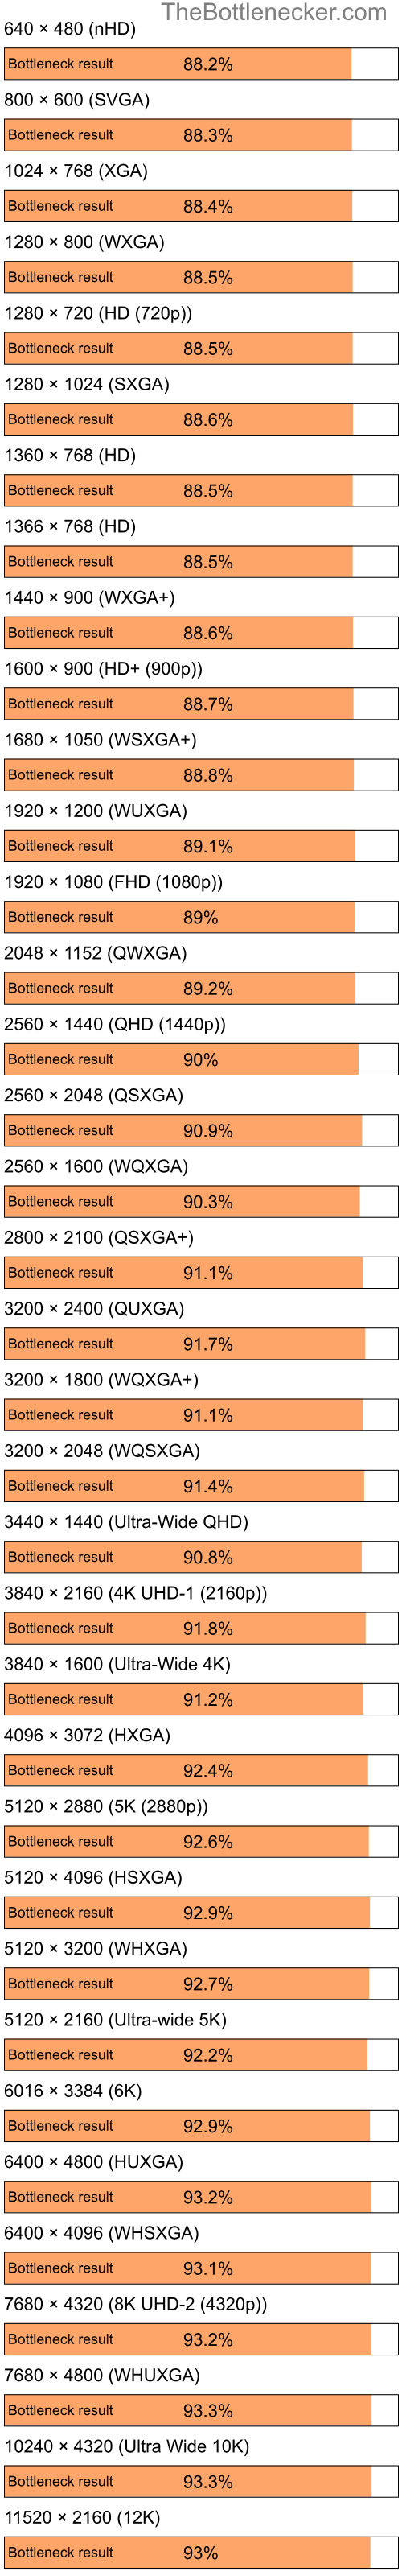 Bottleneck results by resolution for Intel Pentium 4 and NVIDIA GeForce2 MX 200 in Processor Intense Tasks